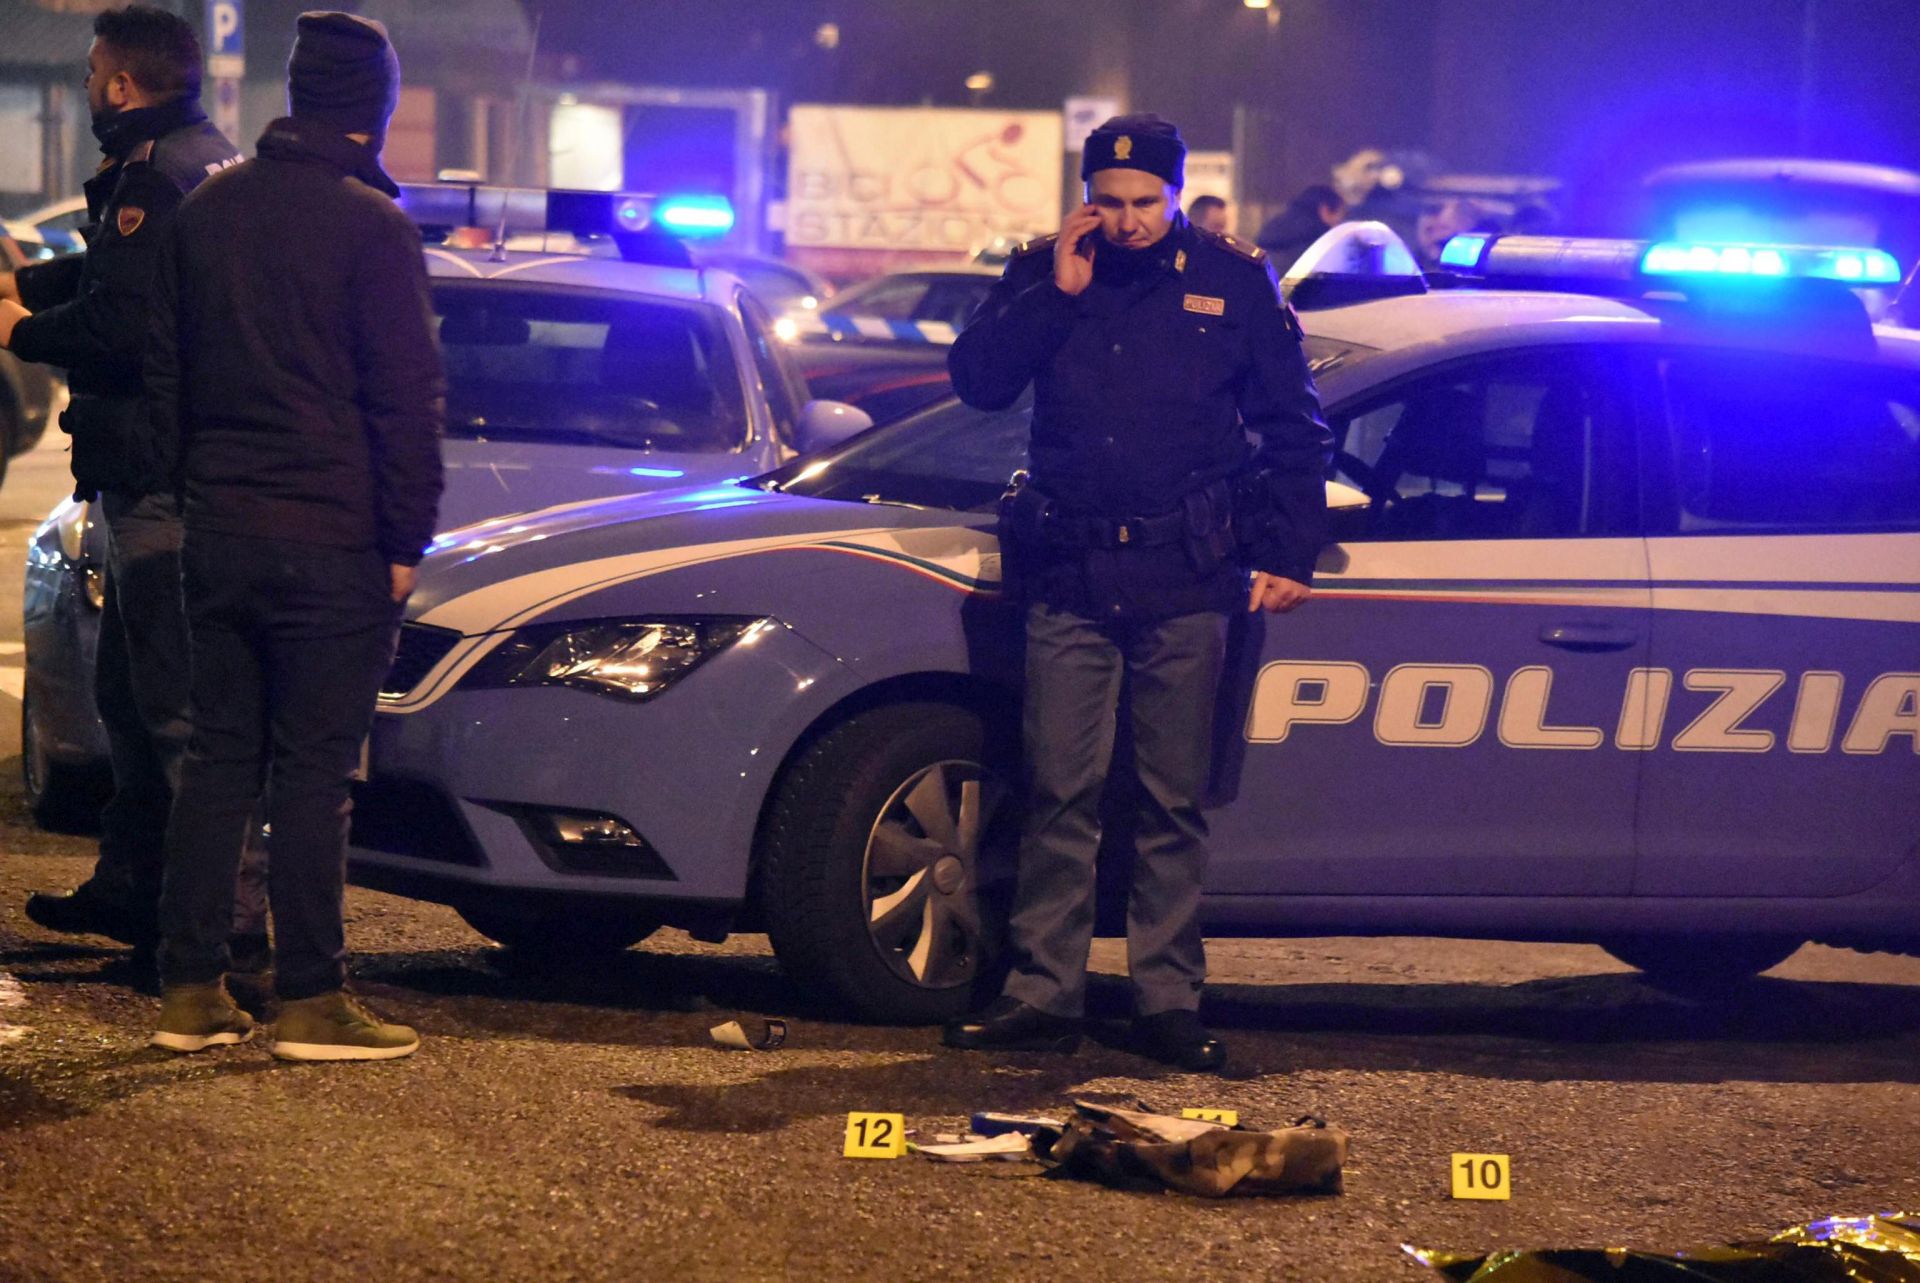 epa05686394 Italian police stand near the scene of a shootout between police and a man in Milan's Sesto San Giovanni neighborhood, early 23 December 2016. Italy's Interior Minister Marco Minitti meanwhile has confirmed that the identity of the individual shot dead after a gunfight with Italian police this morning near Milan is Anis Amri, the 24 year old Tunisian suspected of the 19 December Berlin Christmas Market terrorist truck attack, that left at least 12 people dead and around 50 others injured.  EPA/DANIELE BENNATI